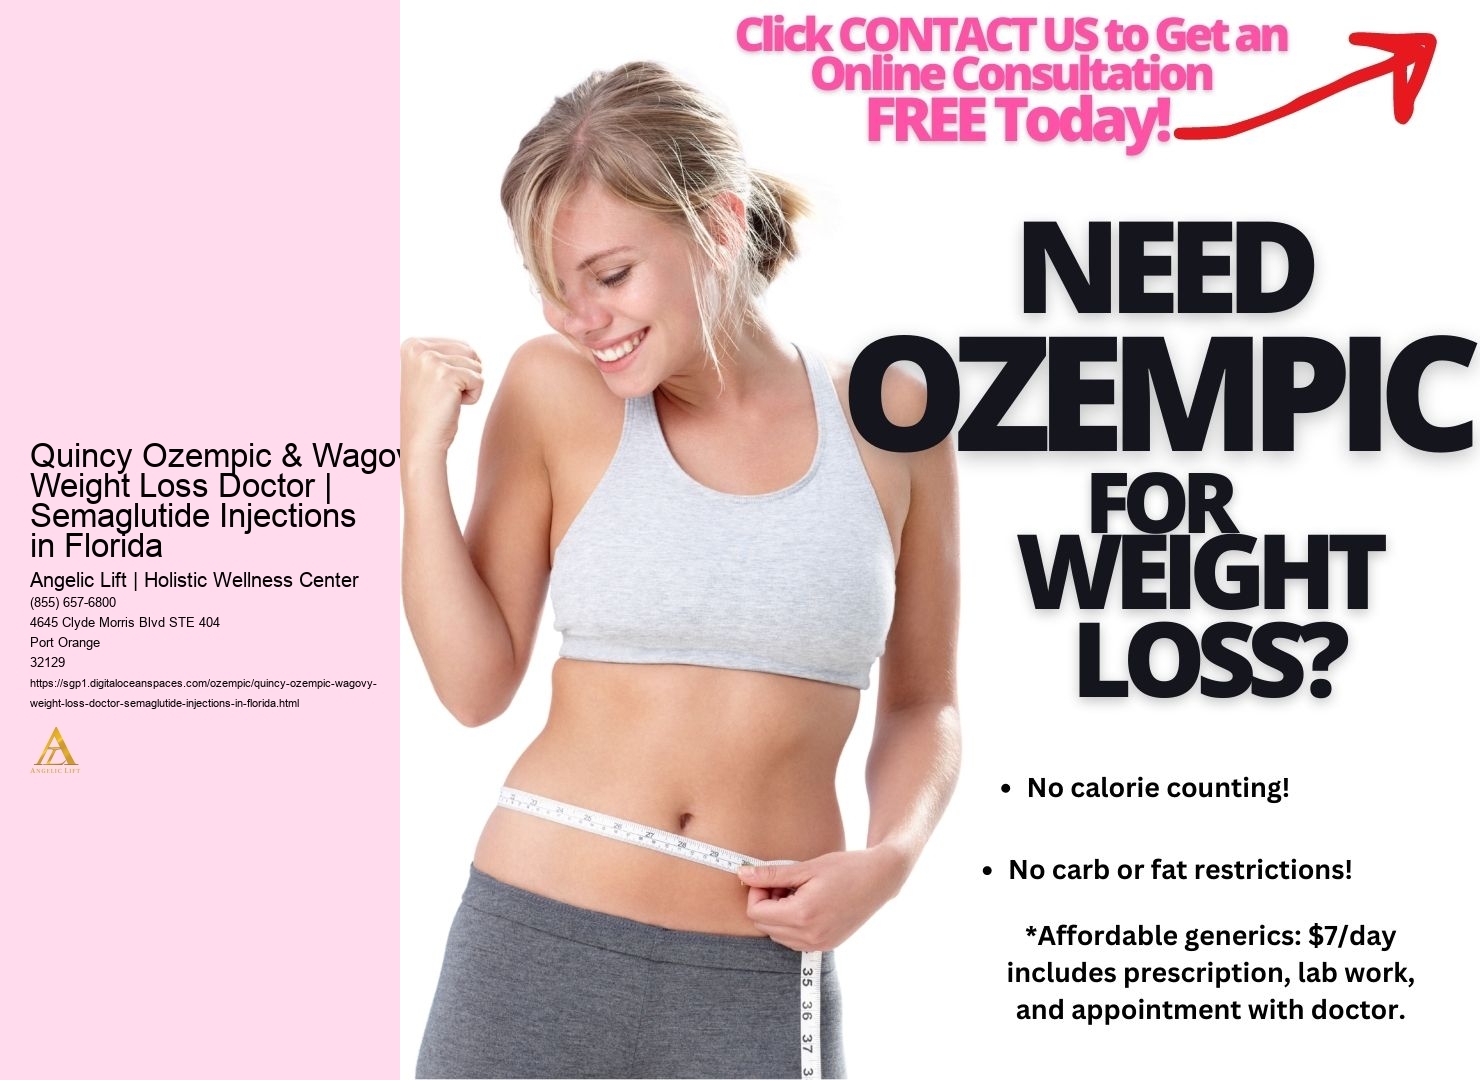 Quincy Ozempic & Wagovy Weight Loss Doctor | Semaglutide Injections in Florida